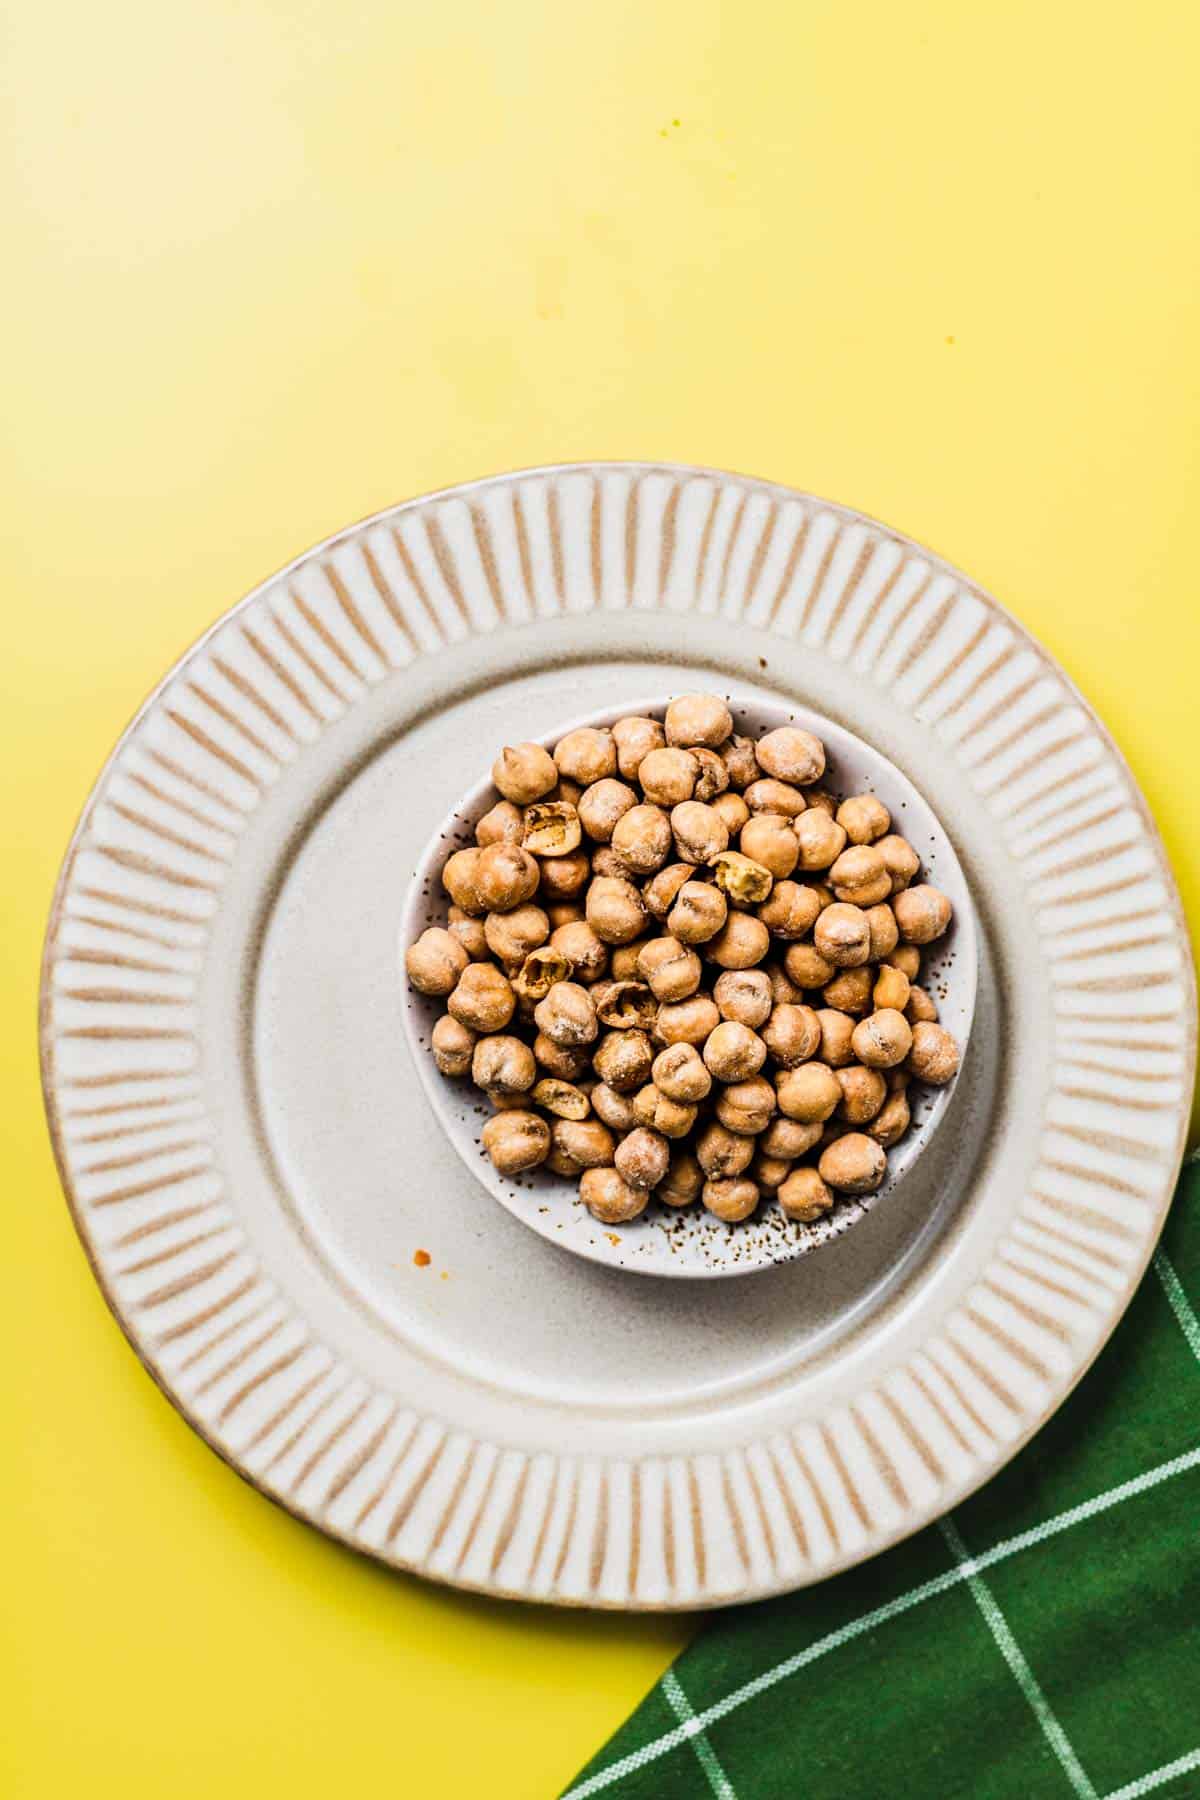 Birds eye view of roasted chickpeas in a white bowl.